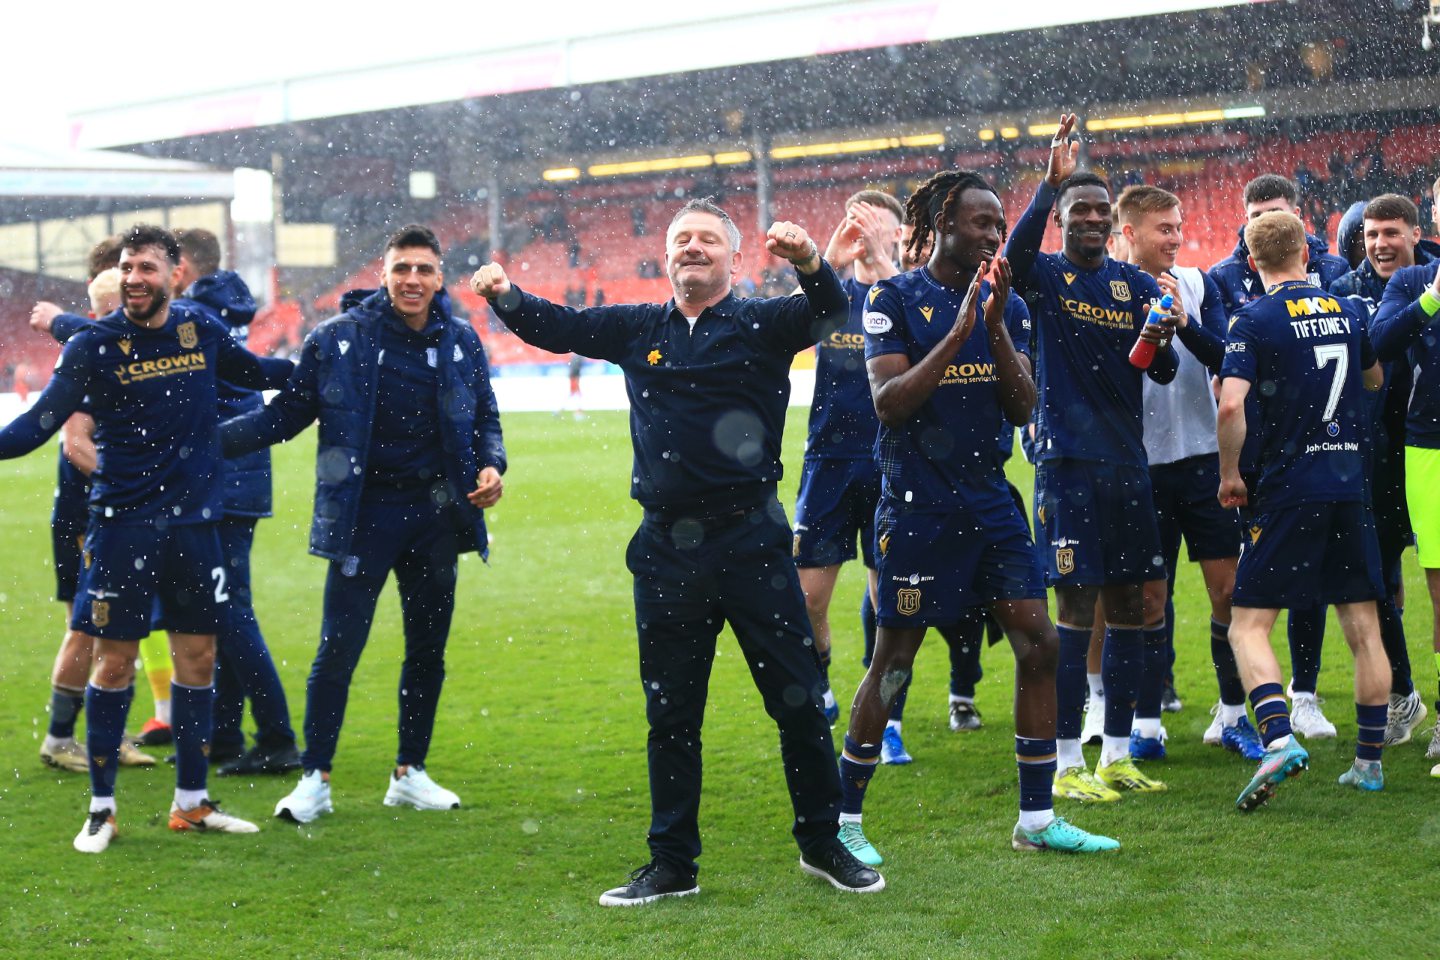 Manager Tony Docherty celebrates with his players in front of the Dundee fans. Image: Shutterstock